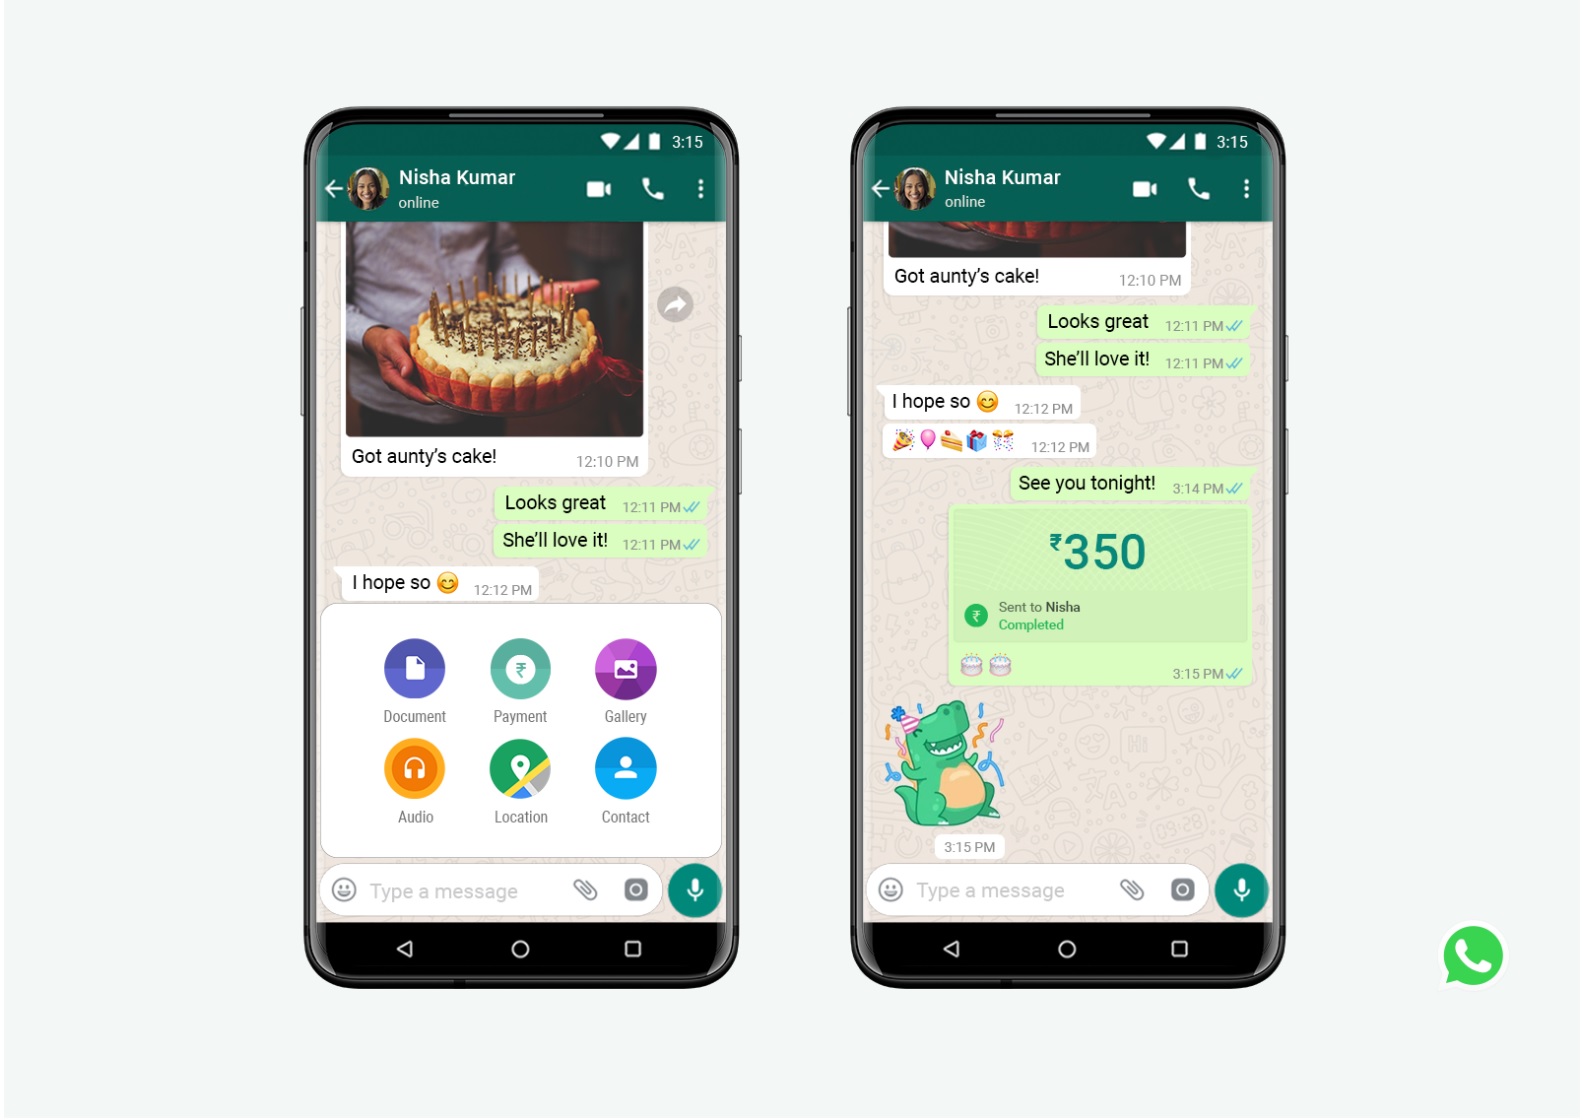 WhatsApp rolls out new feature to double as shopping platform